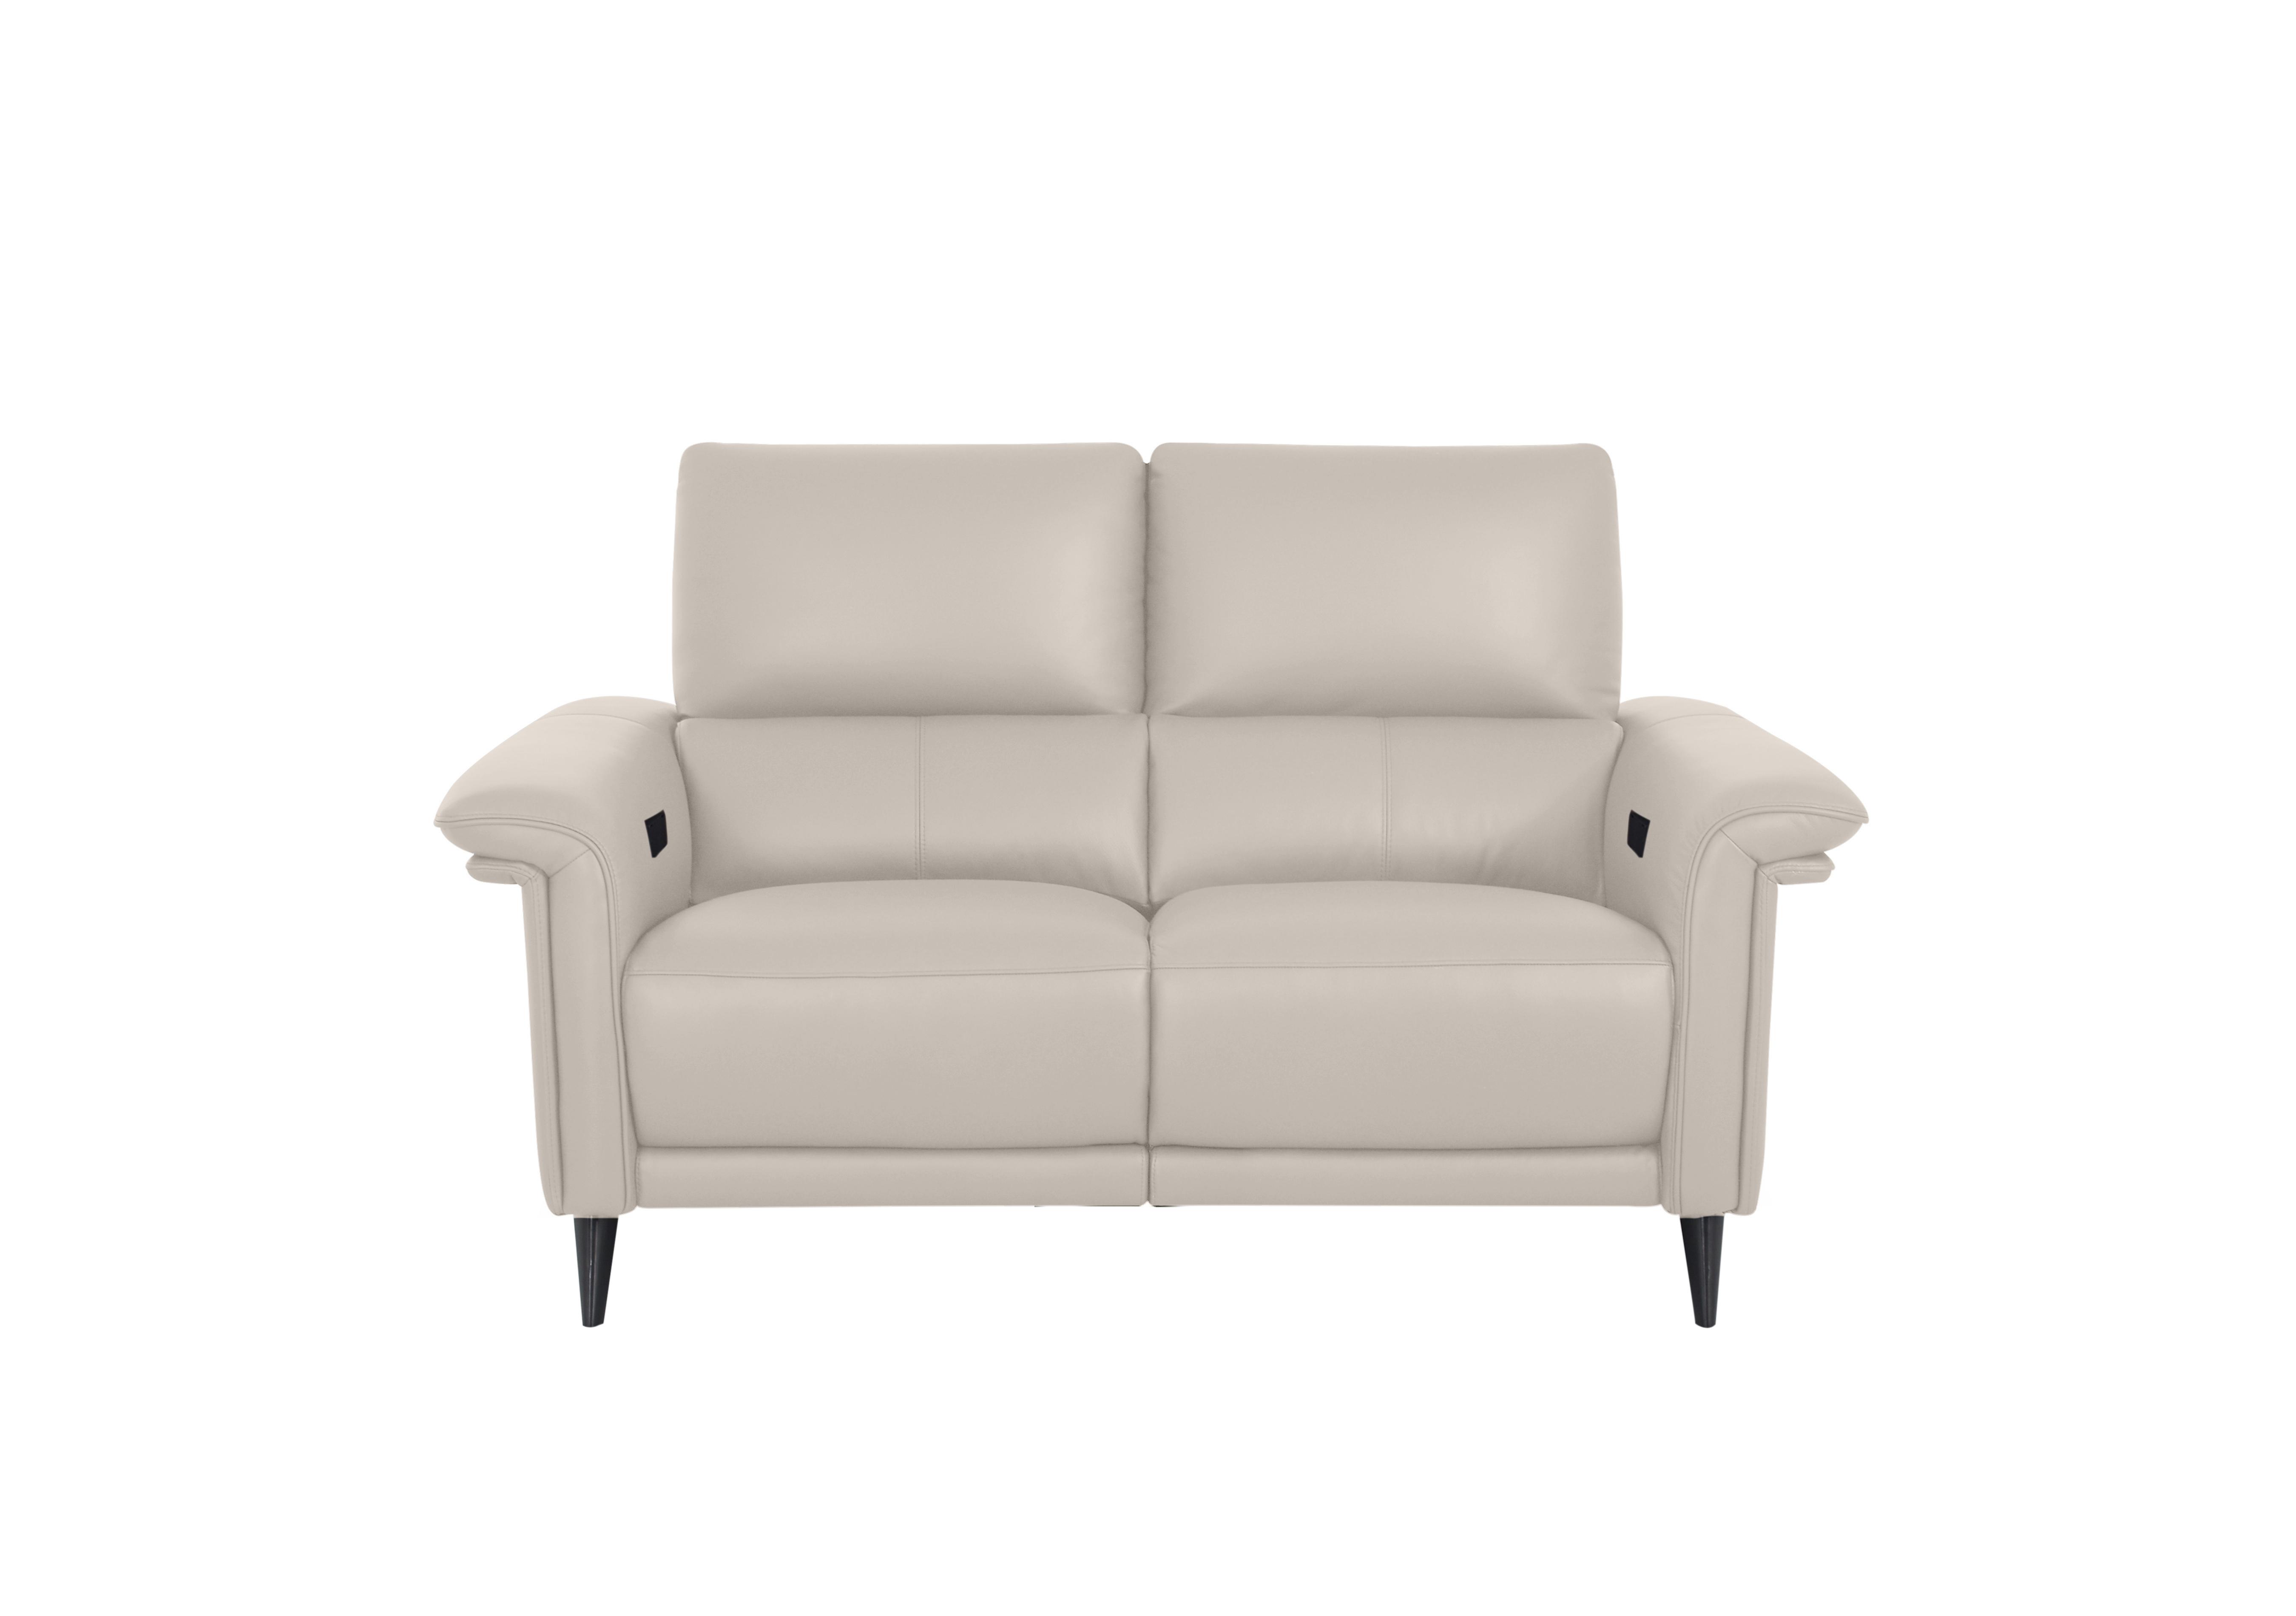 Huxley 2 Seater Leather Sofa in Np-521e Frost on Furniture Village